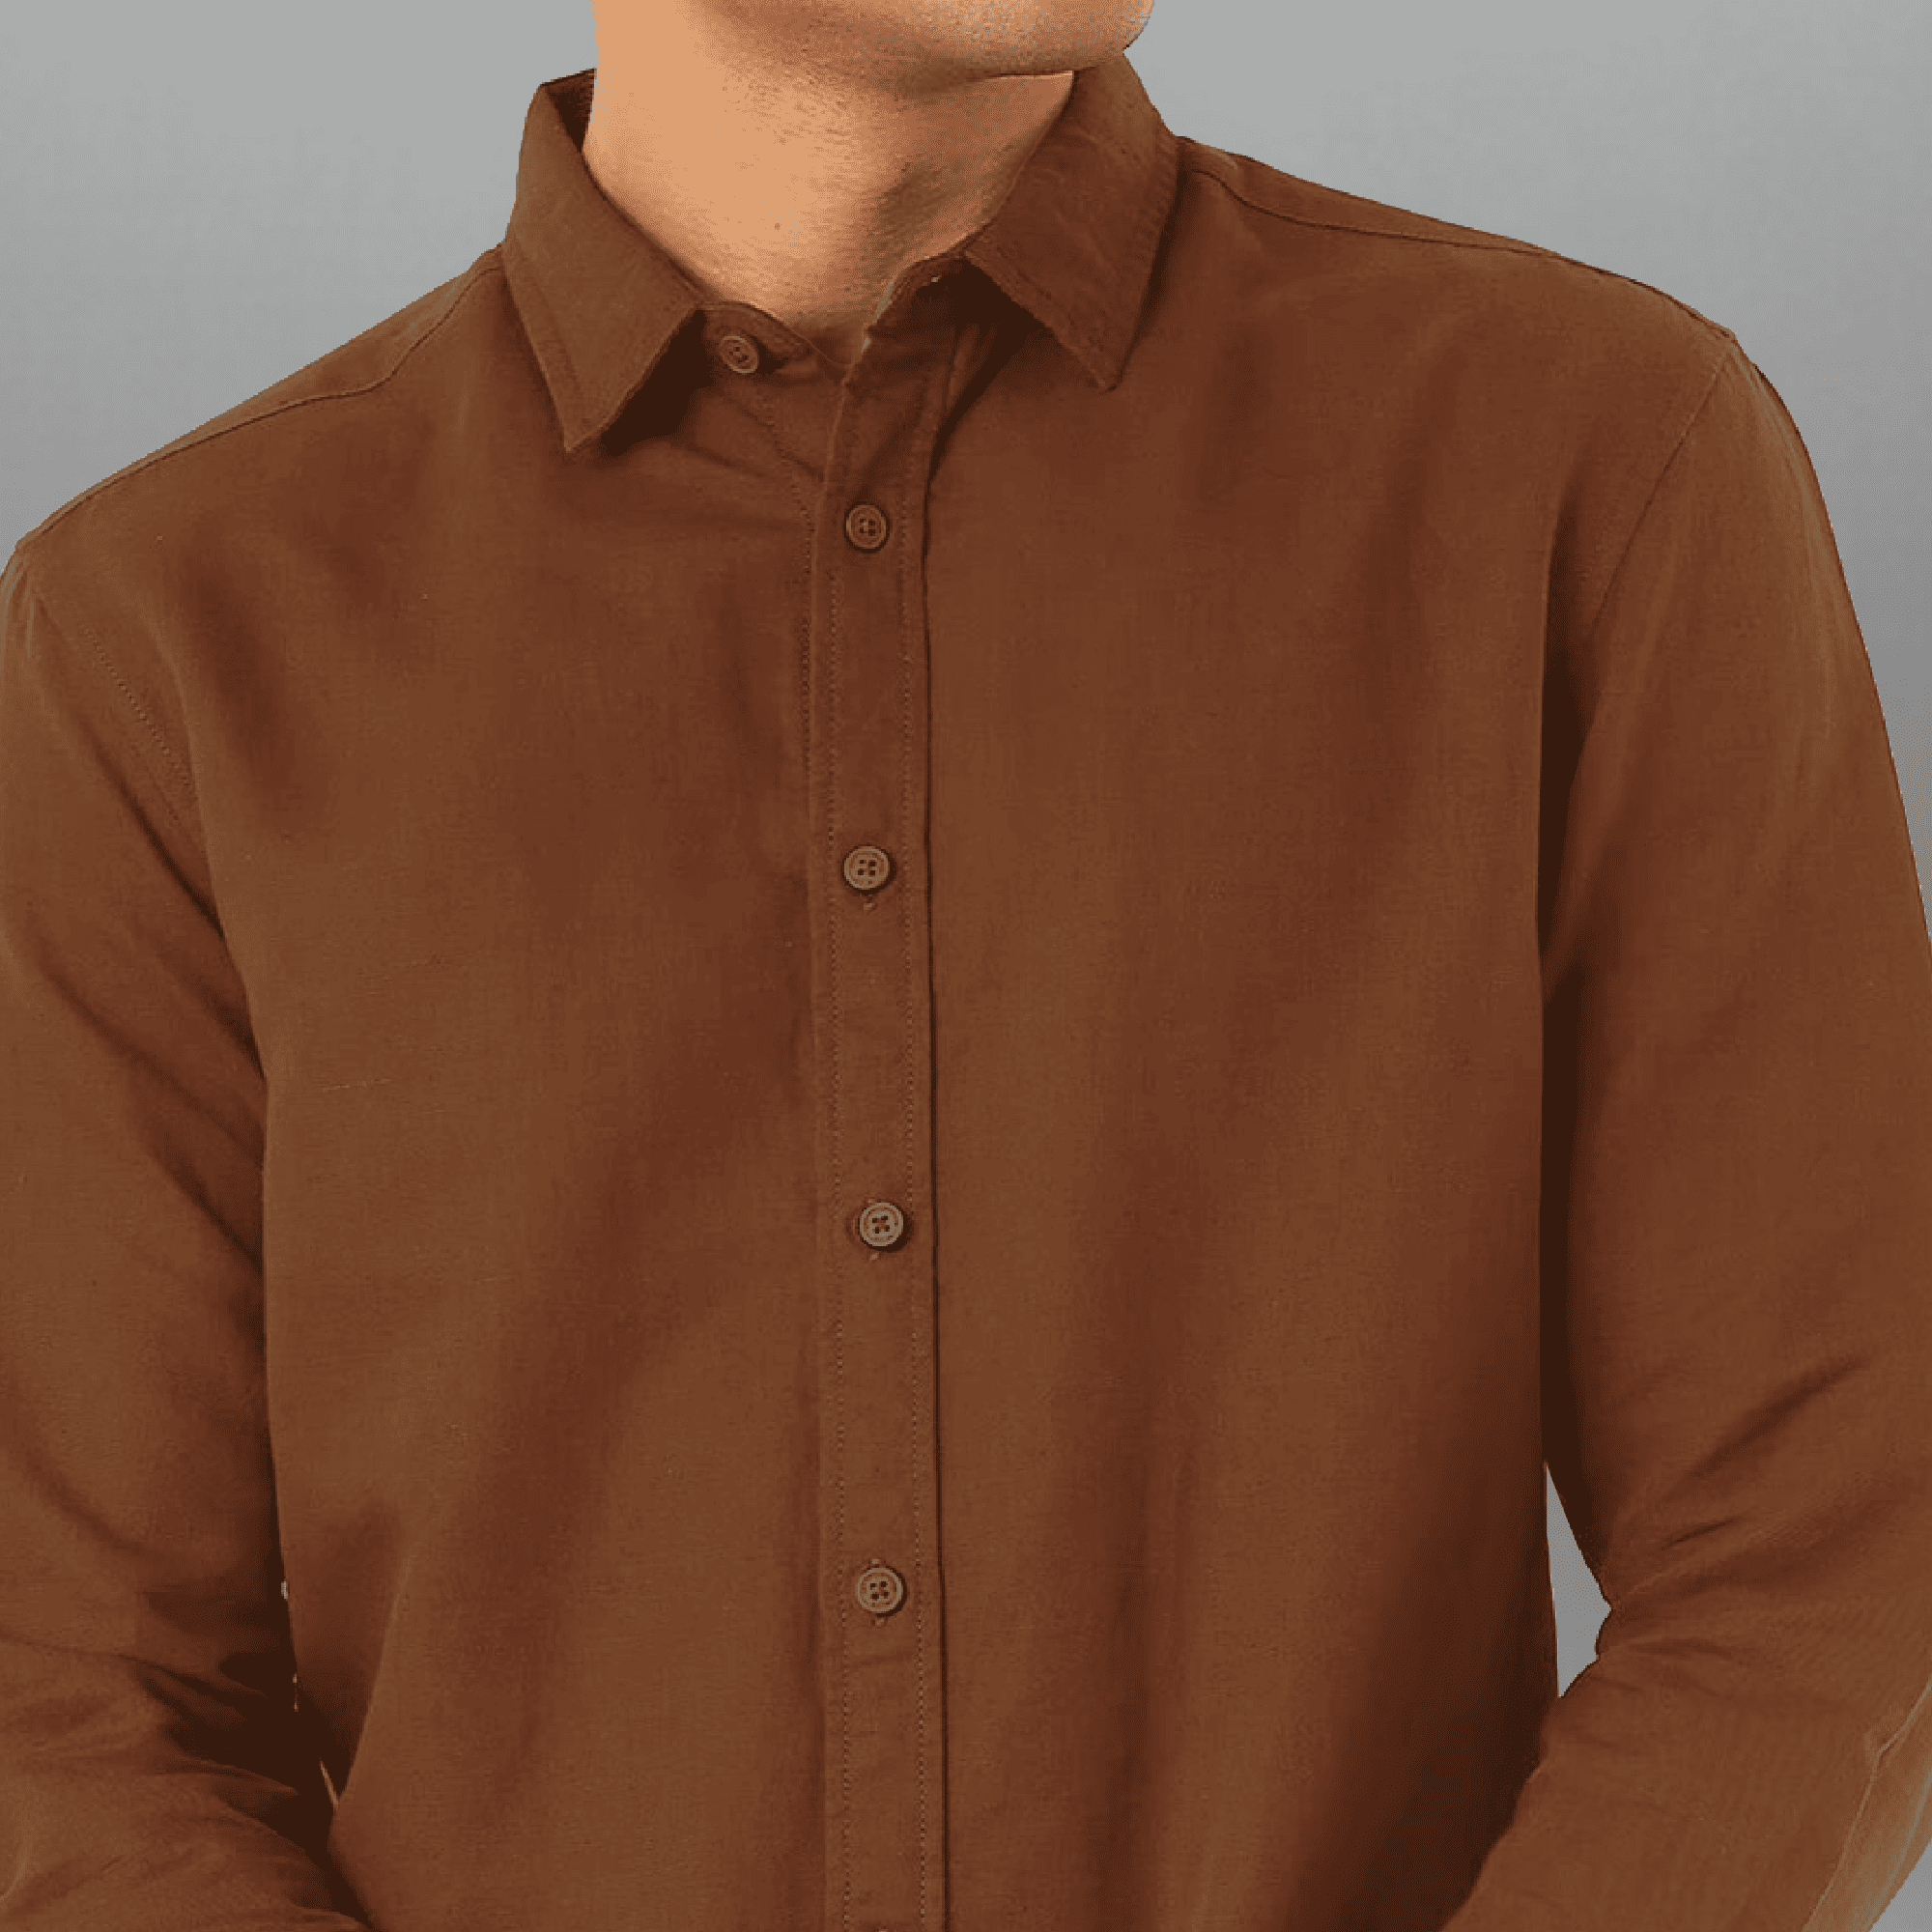 Men's Full Sleeve Brown Solid Shirt-RMS053